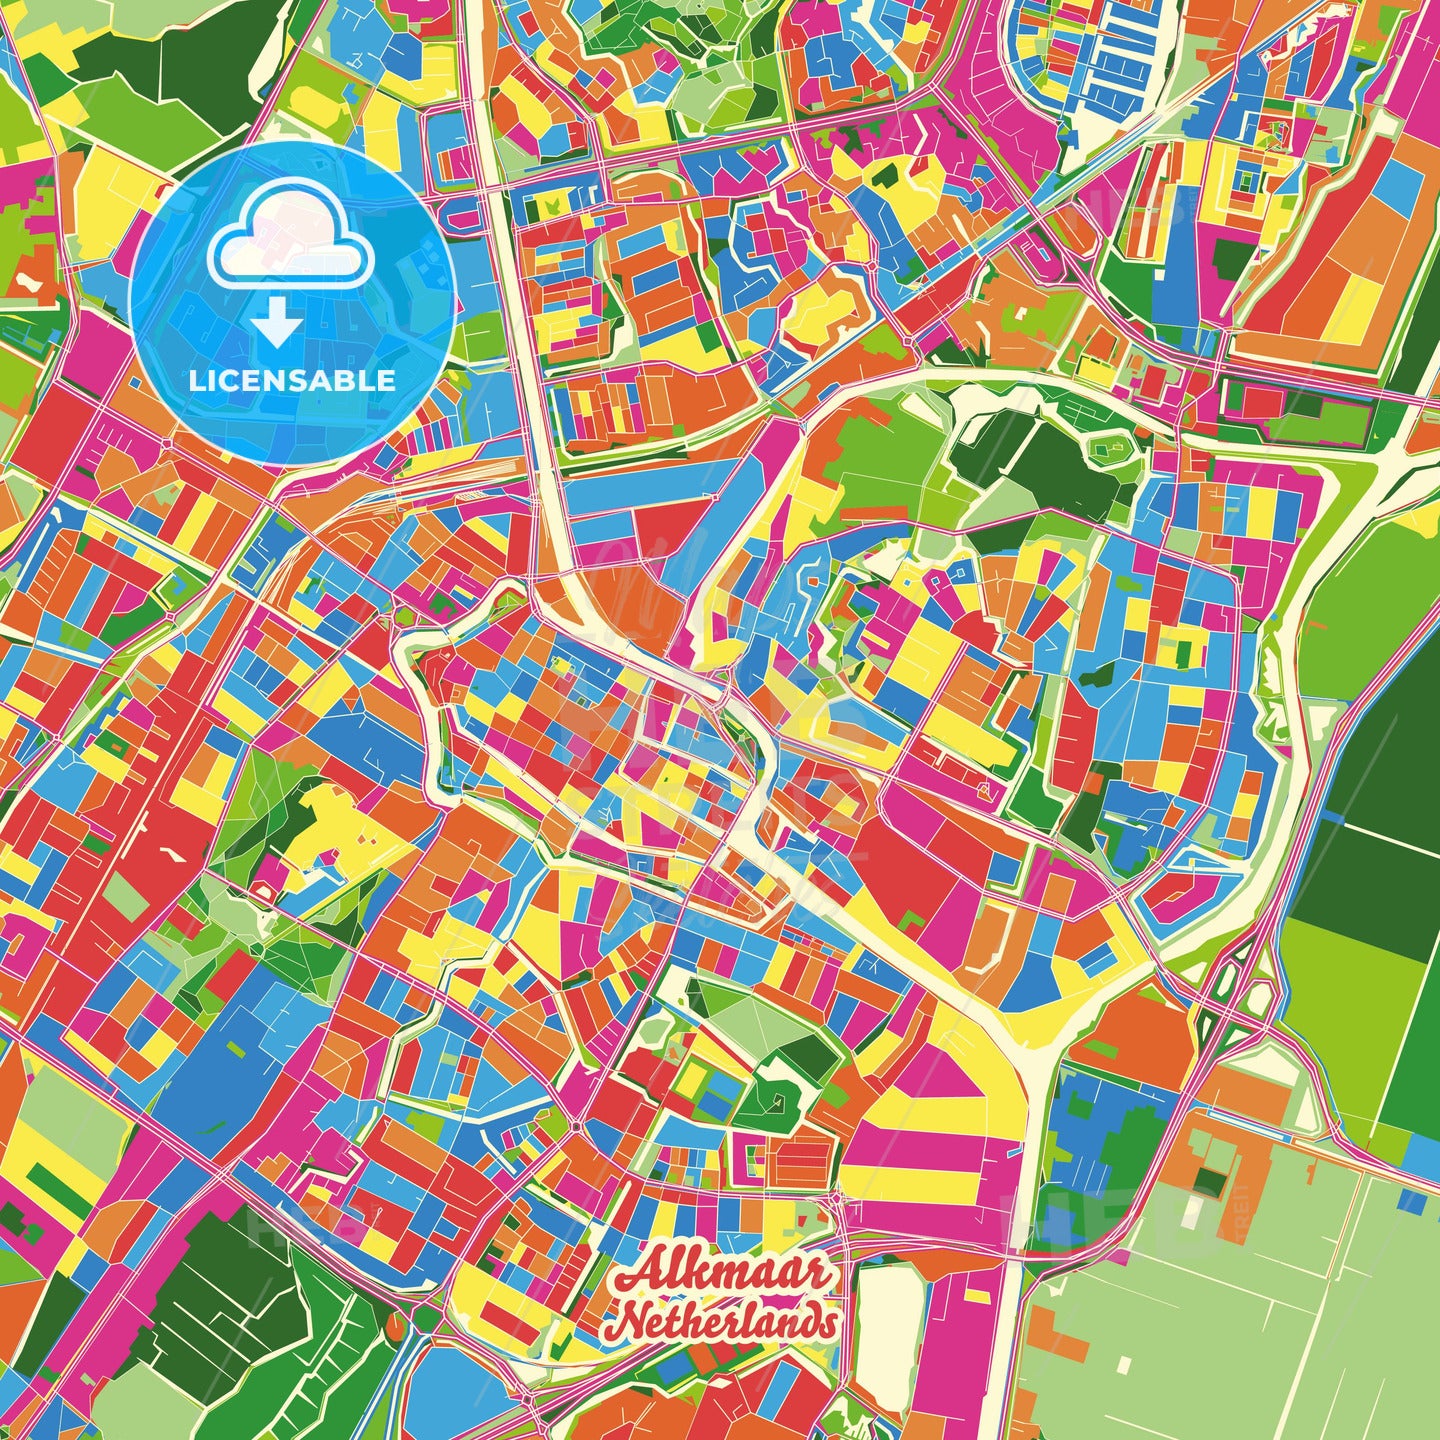 Alkmaar, Netherlands Crazy Colorful Street Map Poster Template - HEBSTREITS Sketches